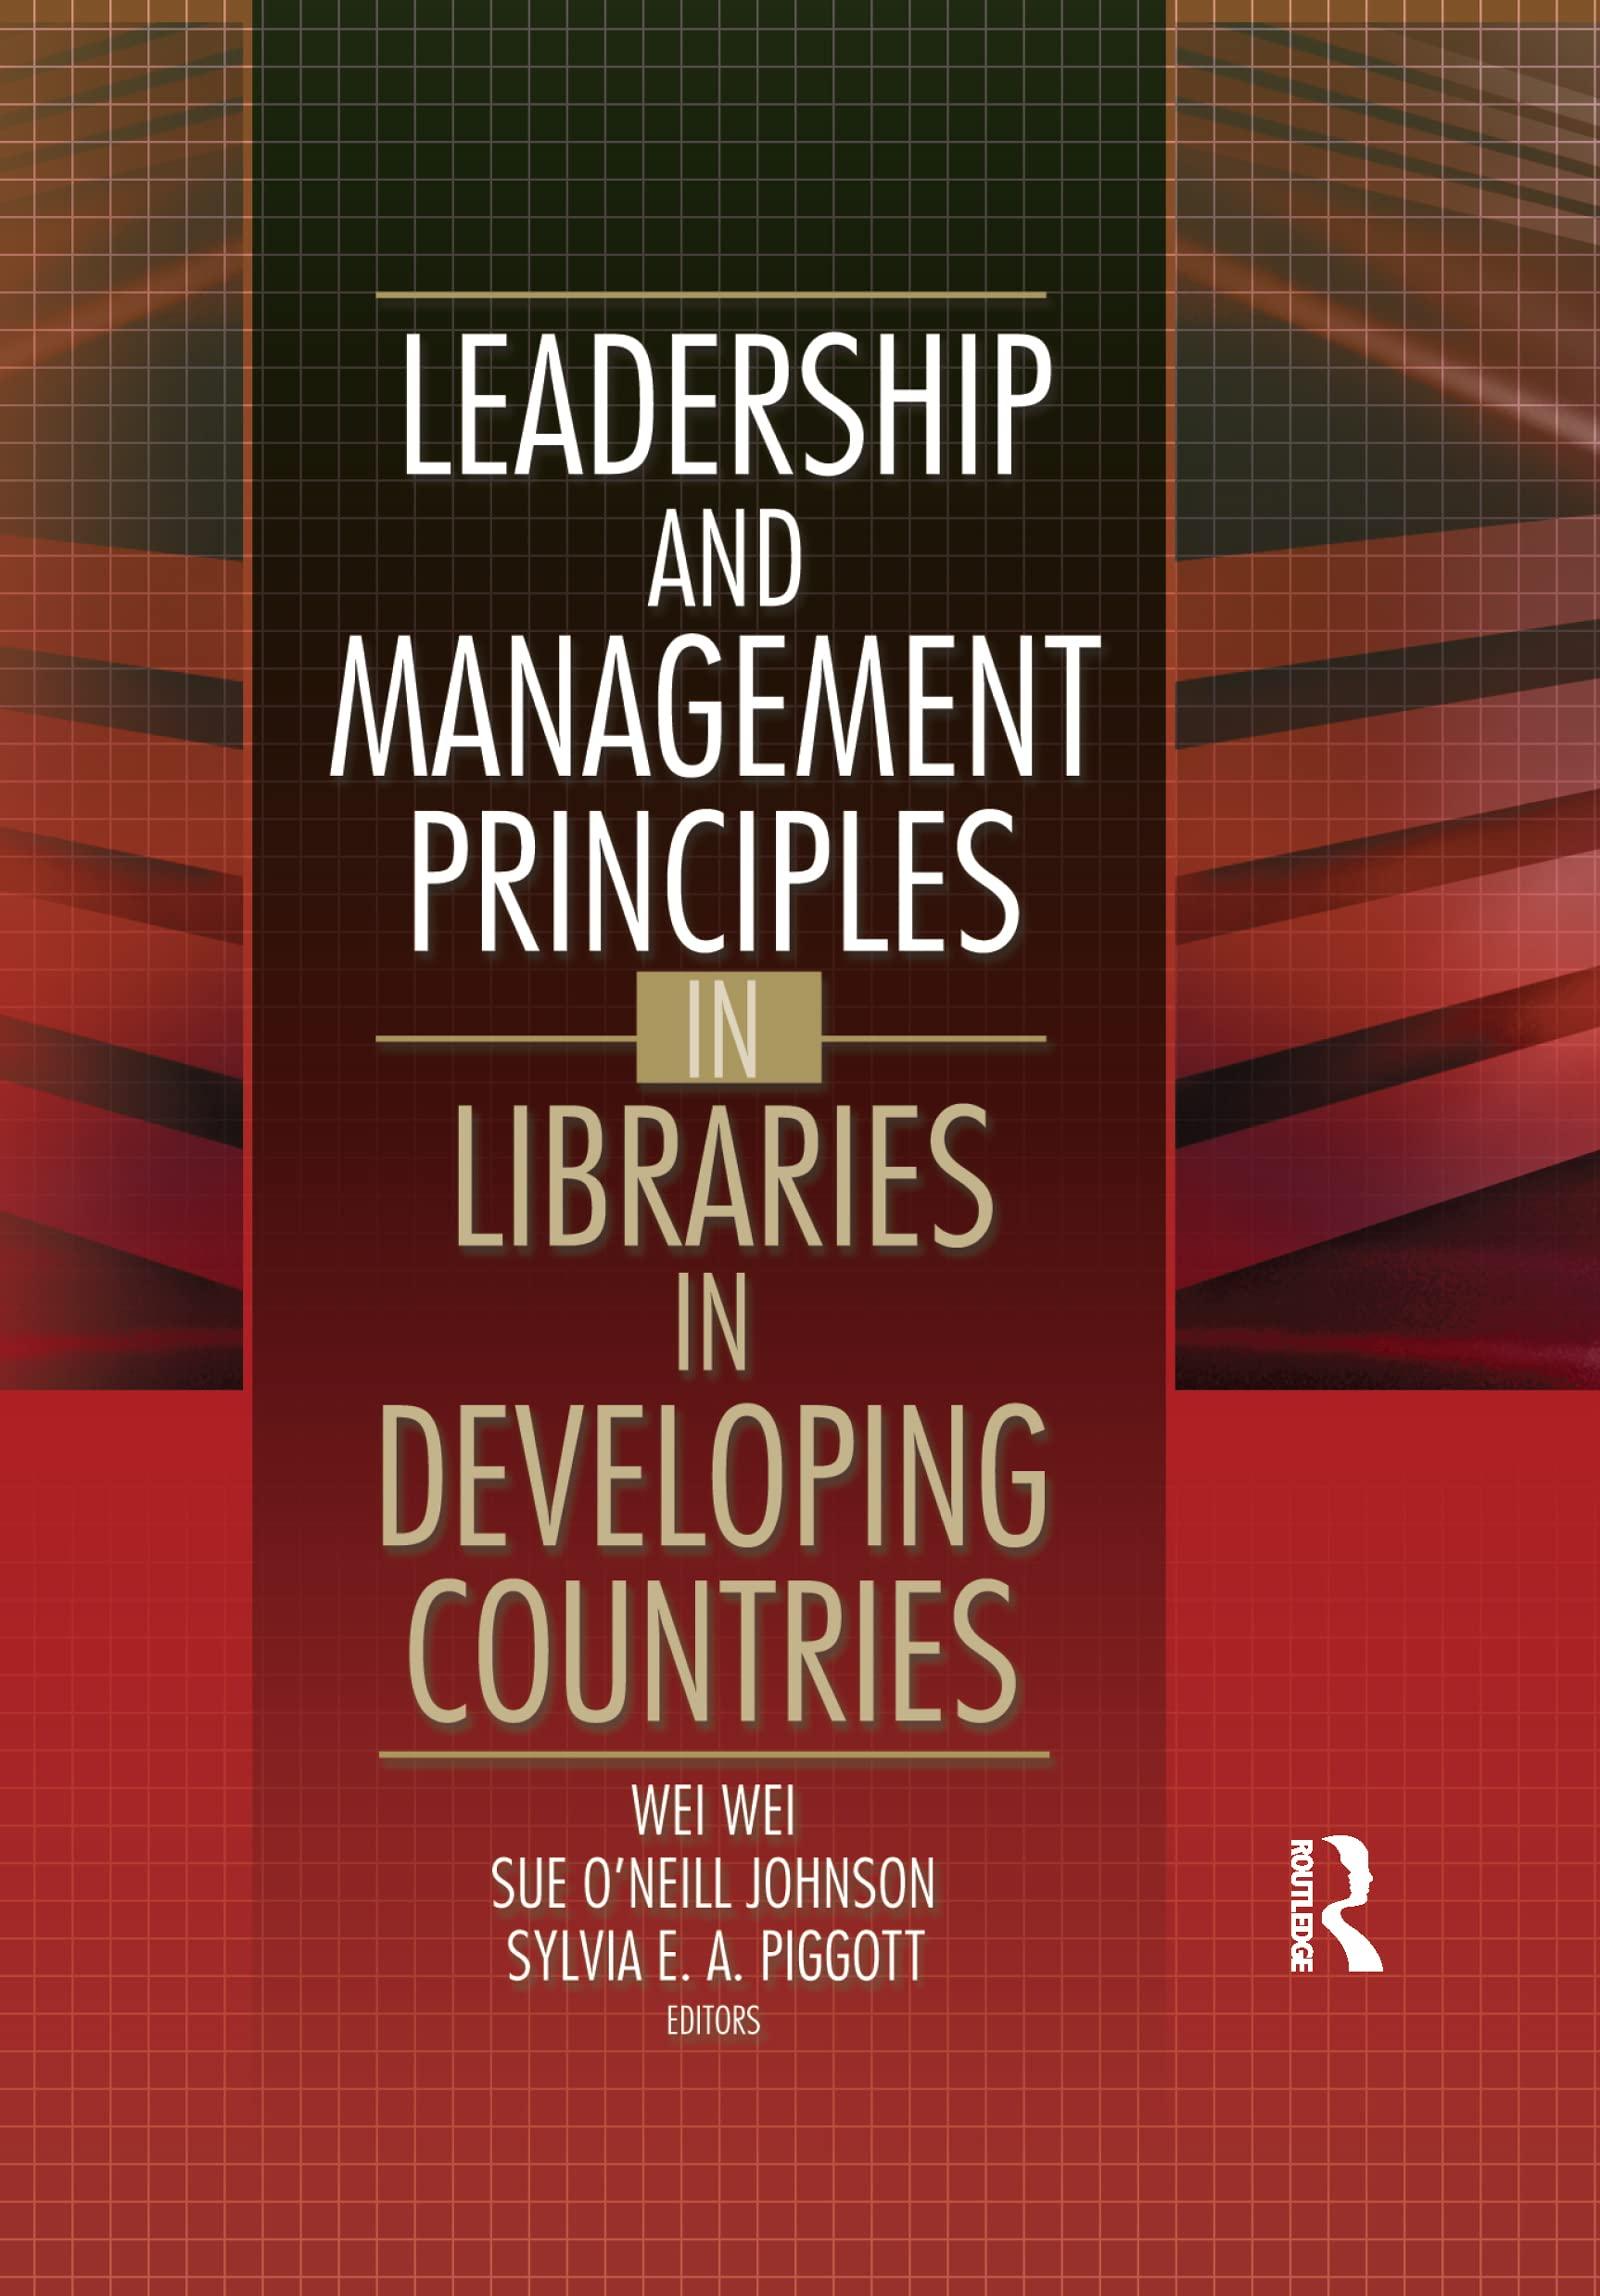 leadership and management principles in libraries in developing countries 1st edition wei wei, sue o'neill